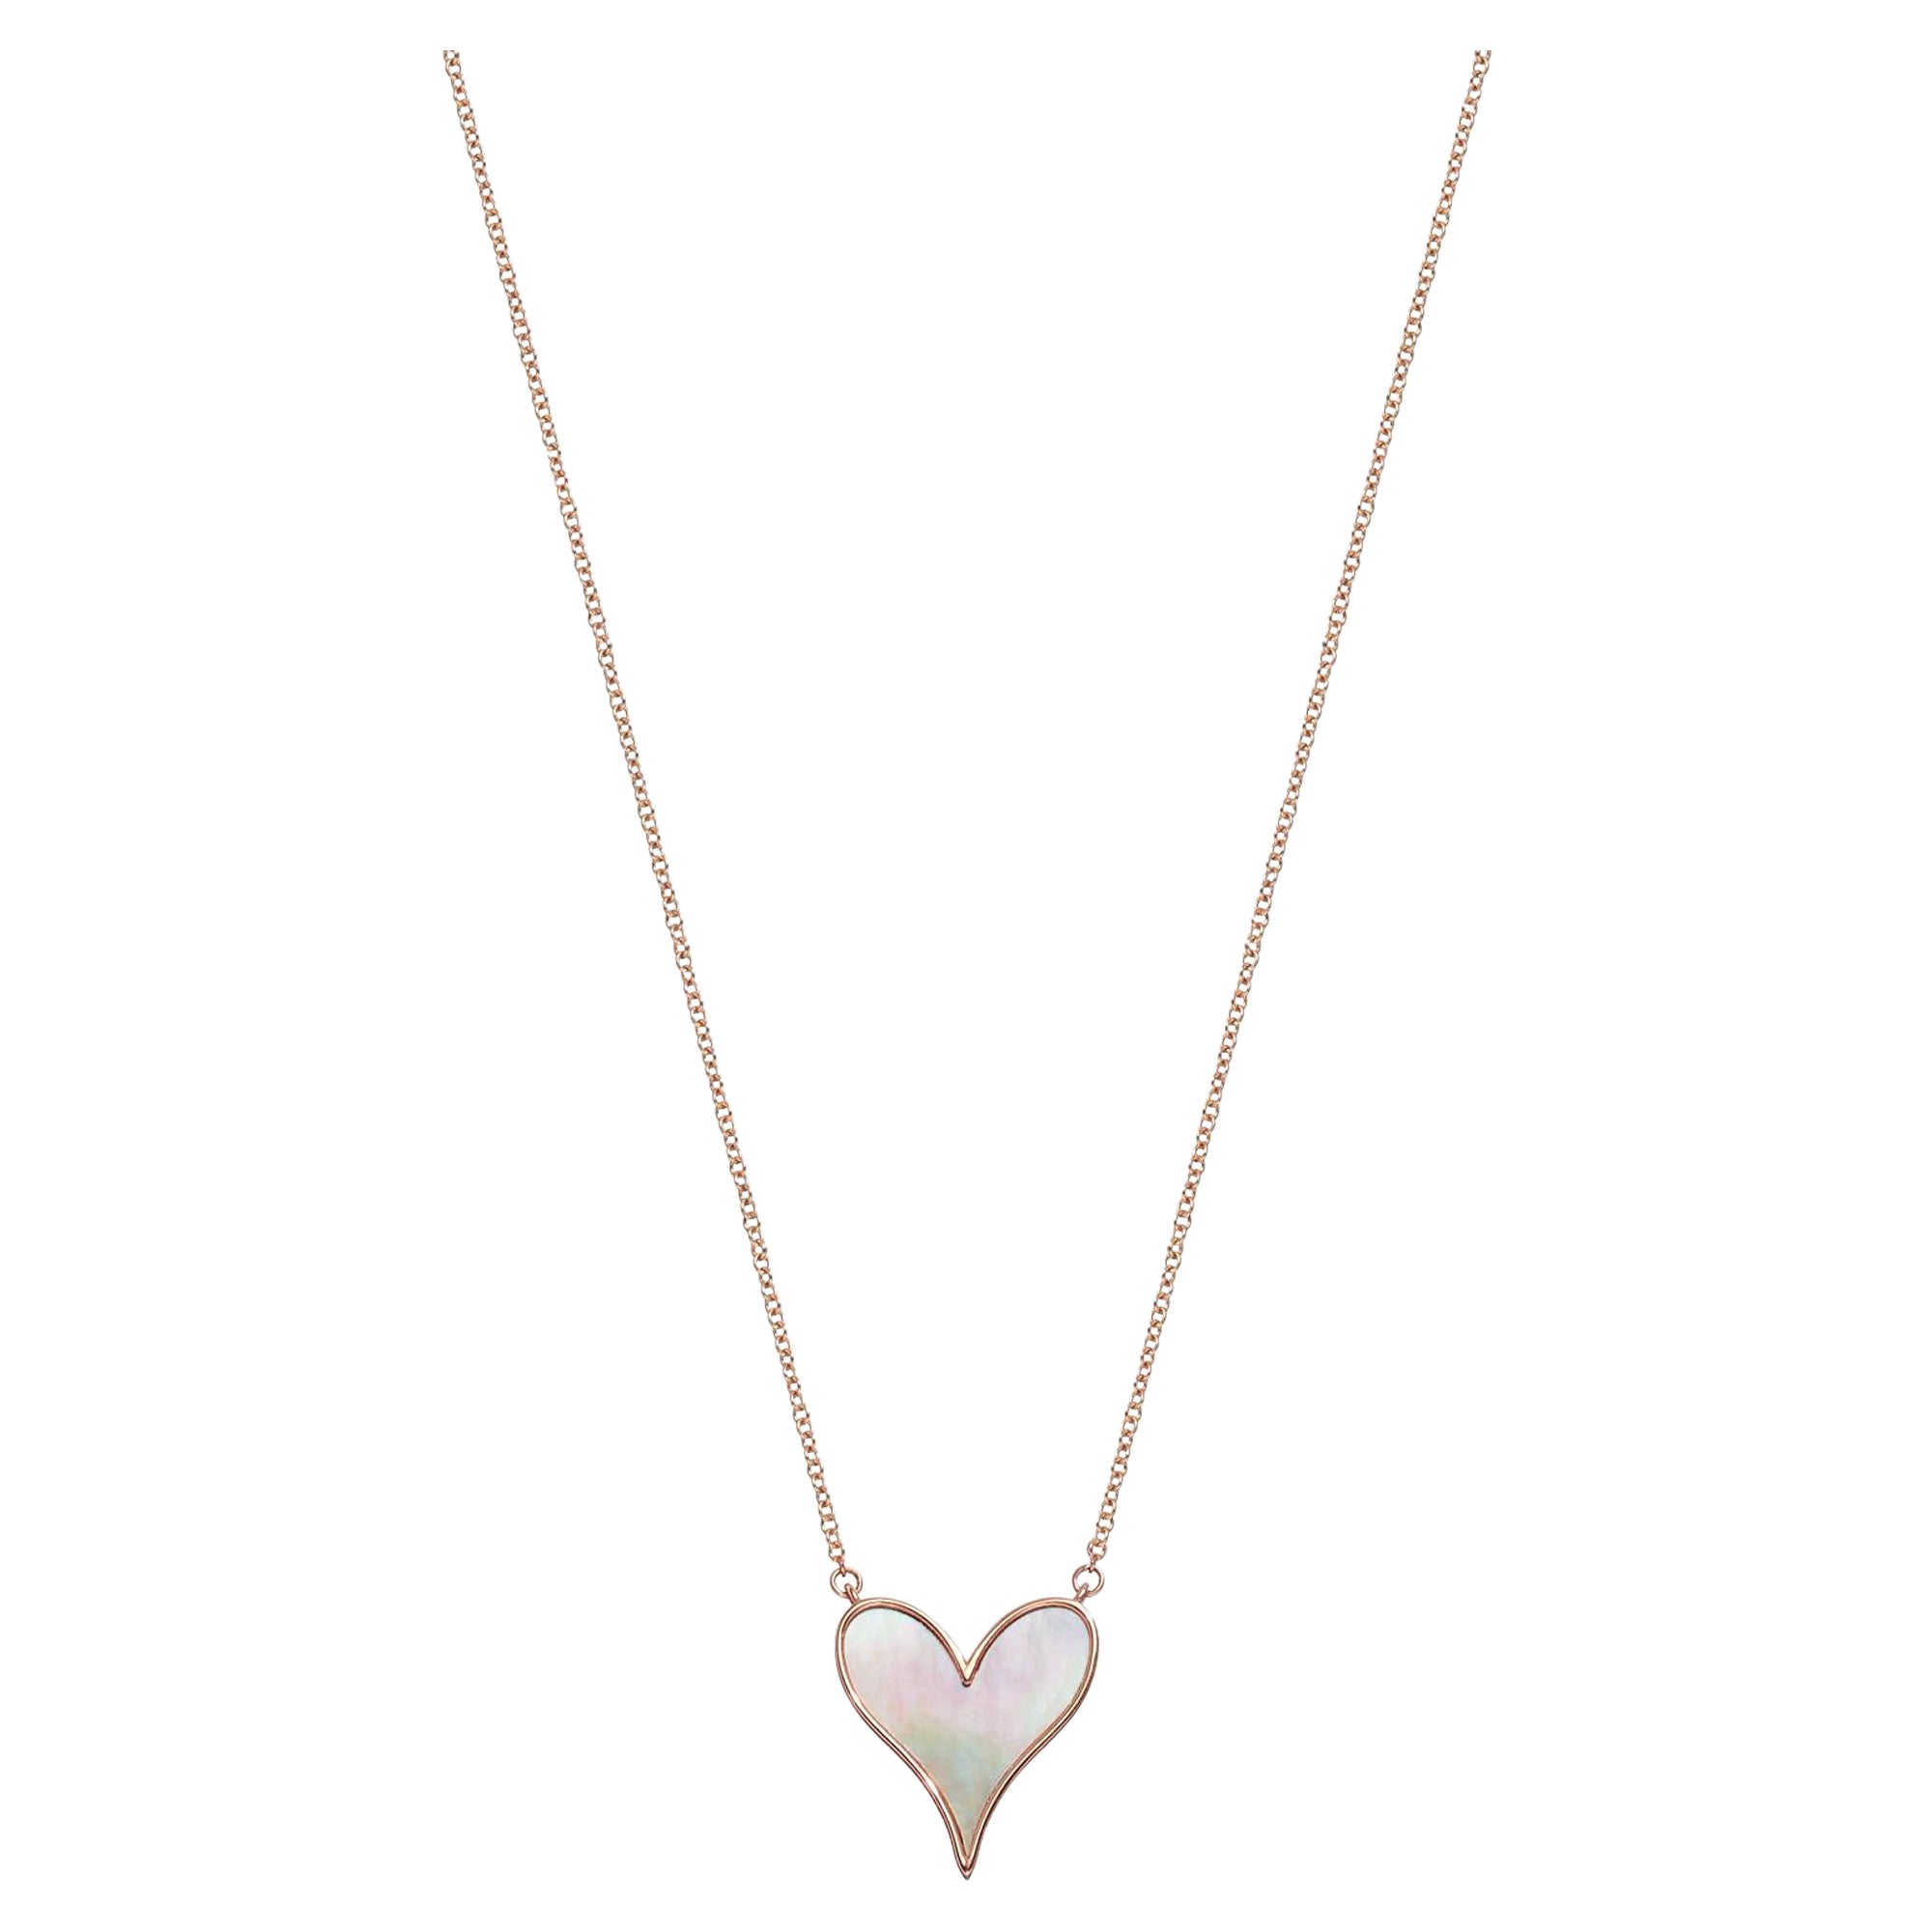 Roseate Jewelry Heart Pendant 15mm in 18k Rose Gold and Mother-of-Pearl For Sale